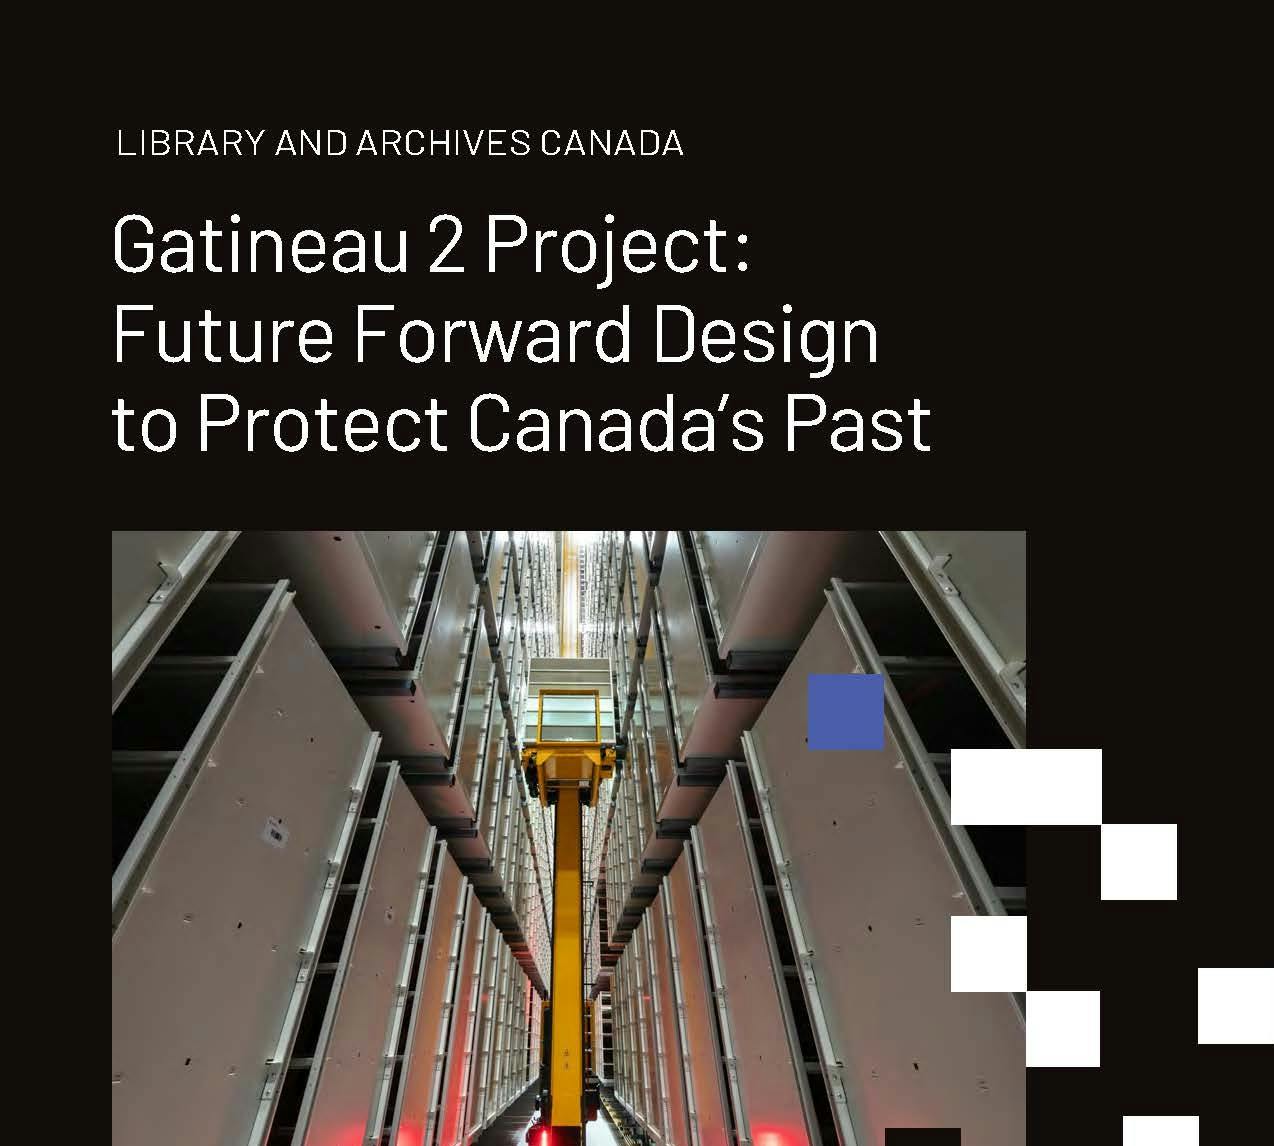 CCPPP releases case study on Gatineau 2 Project image